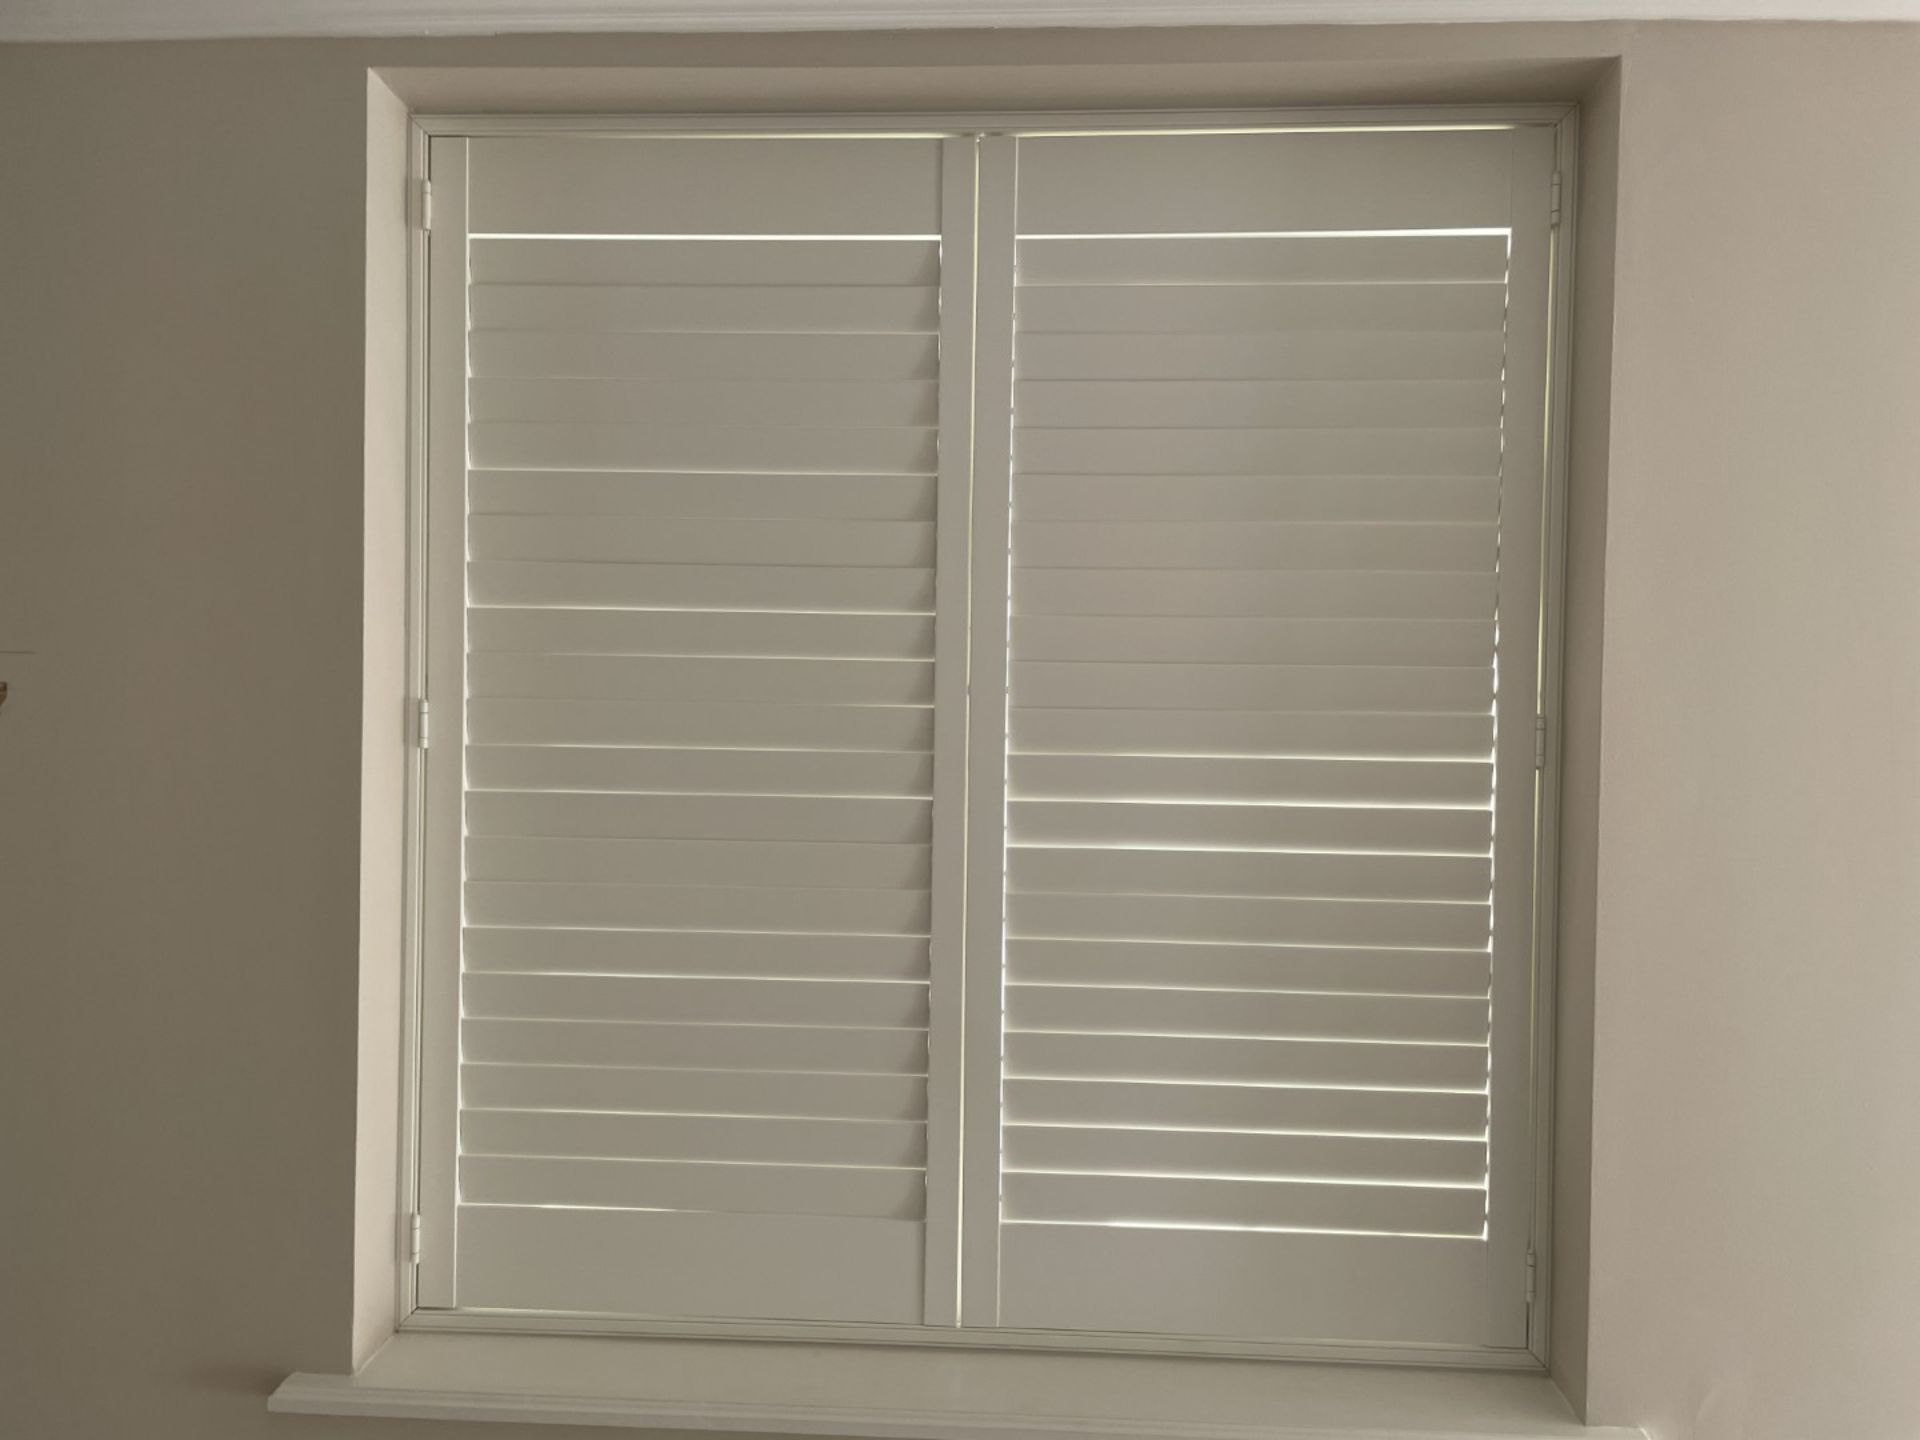 1 x Hardwood Timber Double Glazed Window Frames fitted with Shutter Blinds, In White - Ref: PAN105 - Image 11 of 11